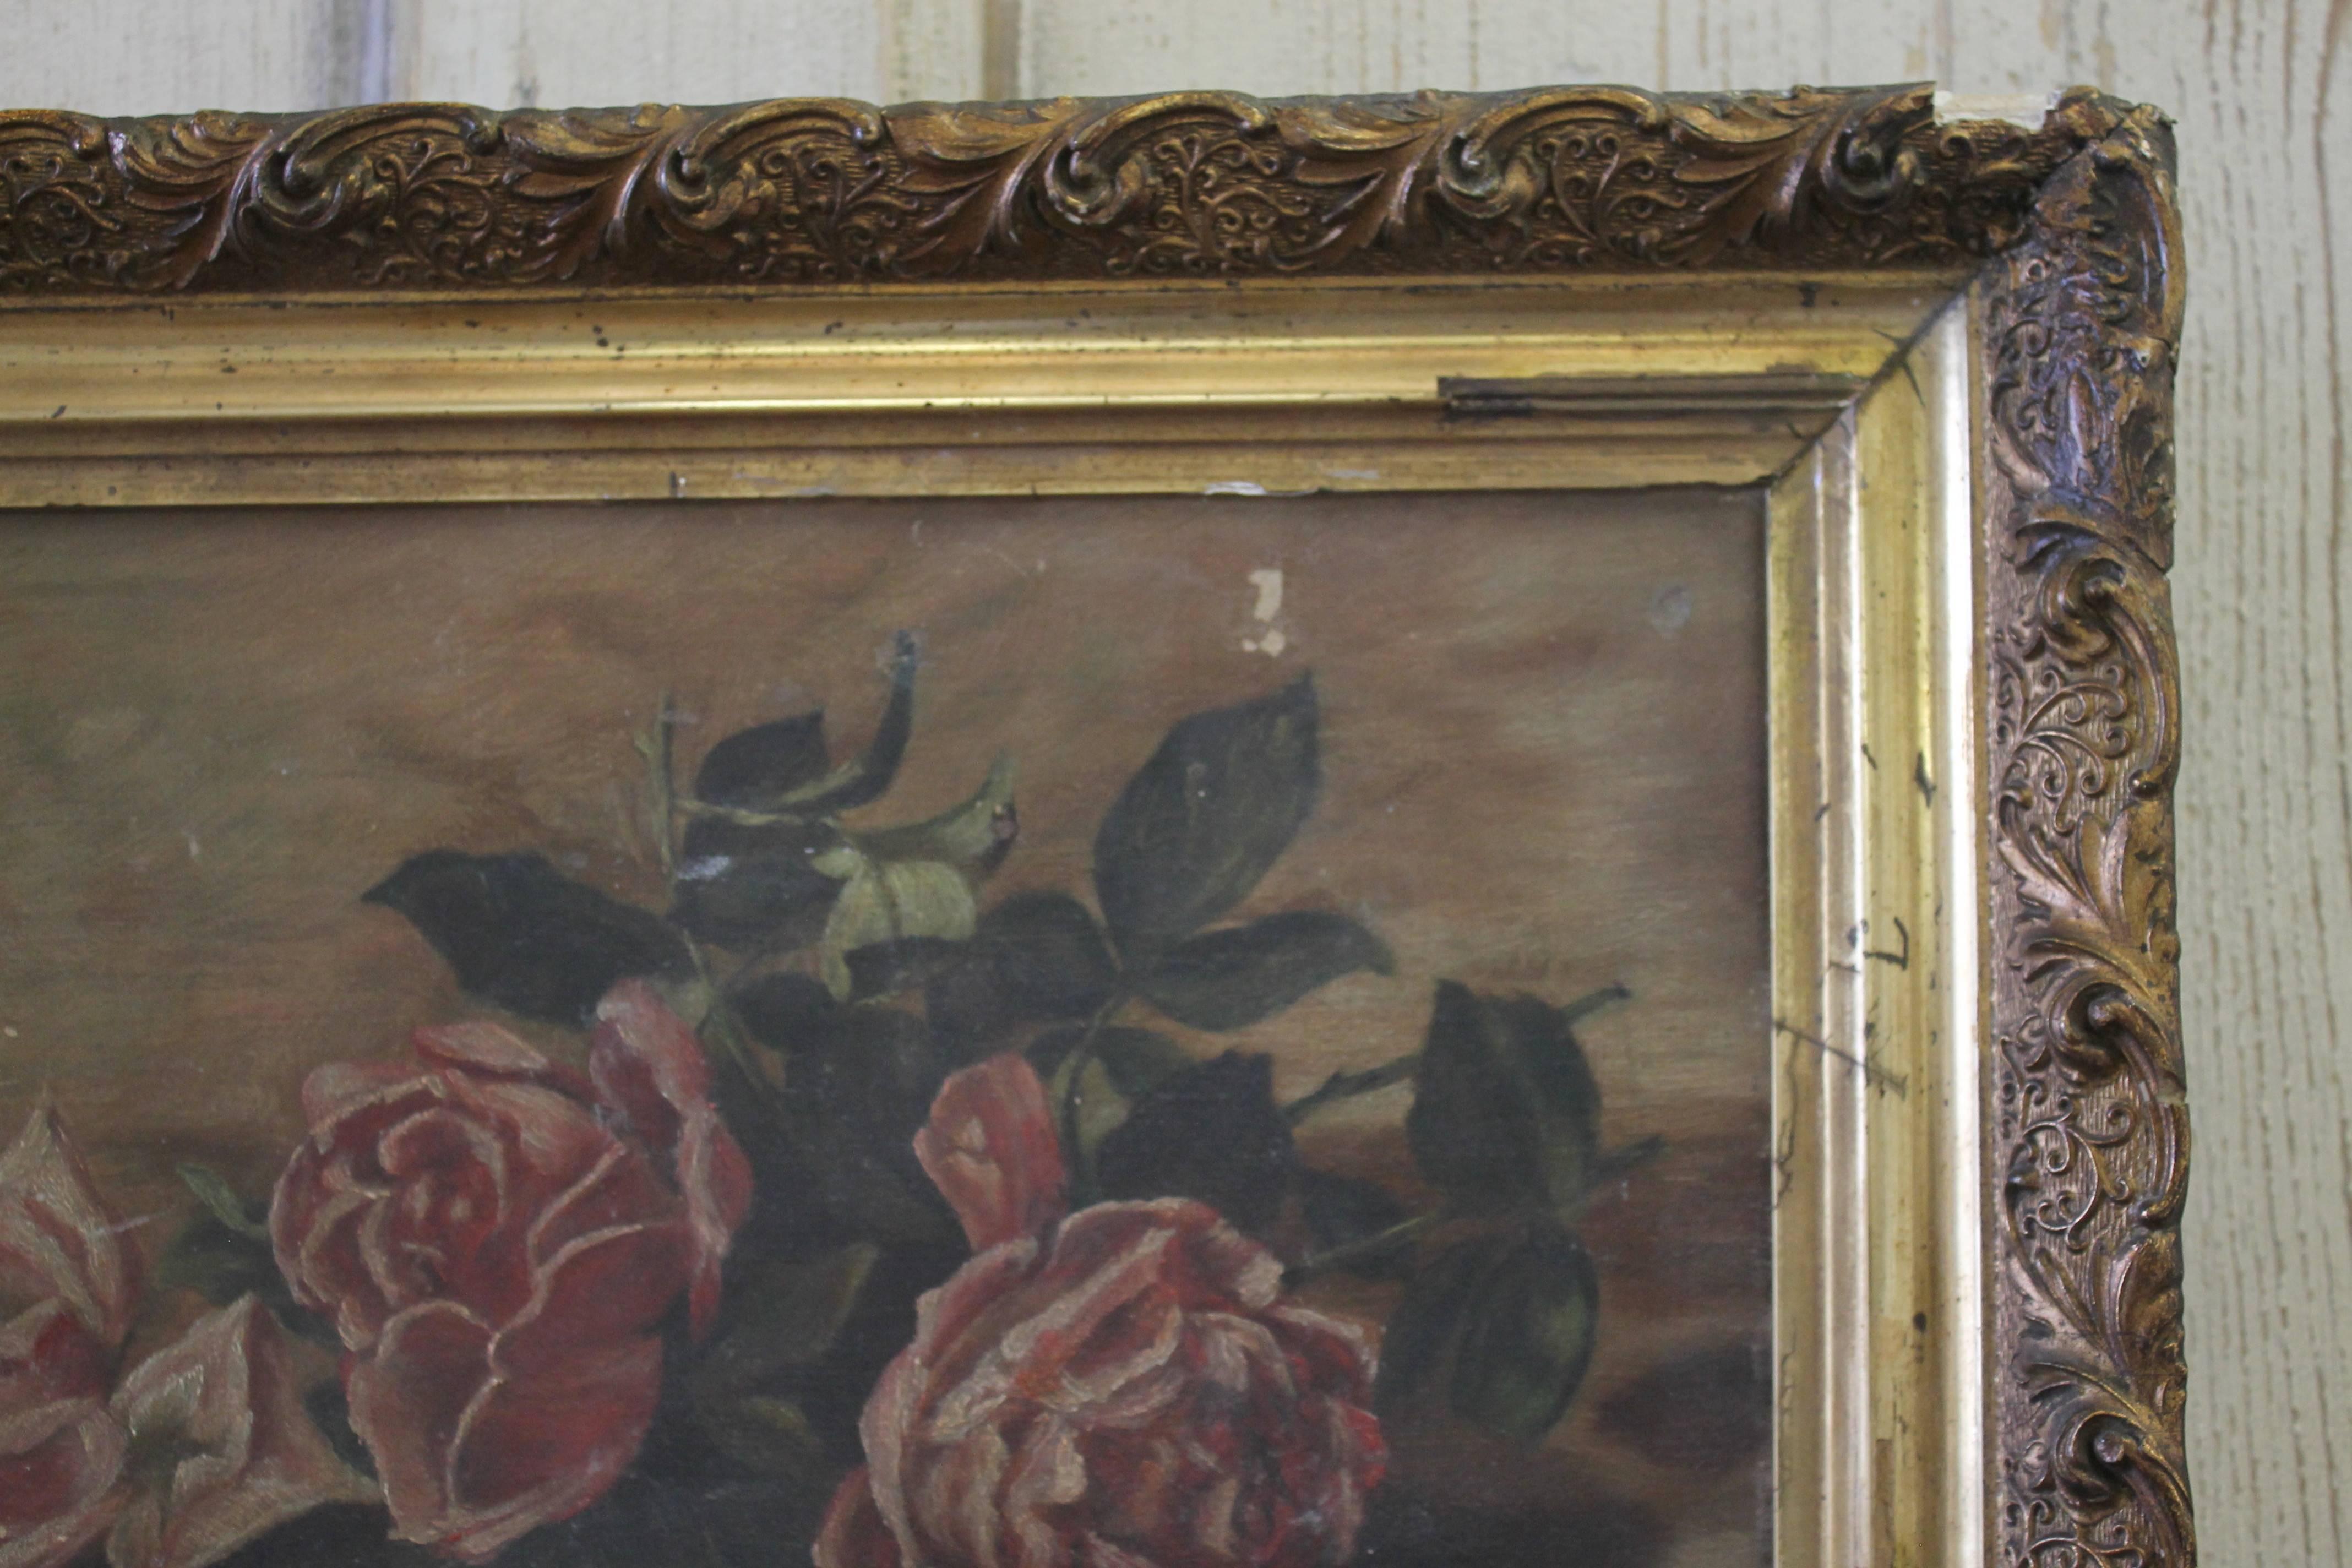 Beautiful antique roses oil, circa 1890-1910.
Canvas, with a beautiful giltwood frame. The canvas has some areas where is has been scratched or scraped, see photo details.
Measures: 14 x 18 x 3.